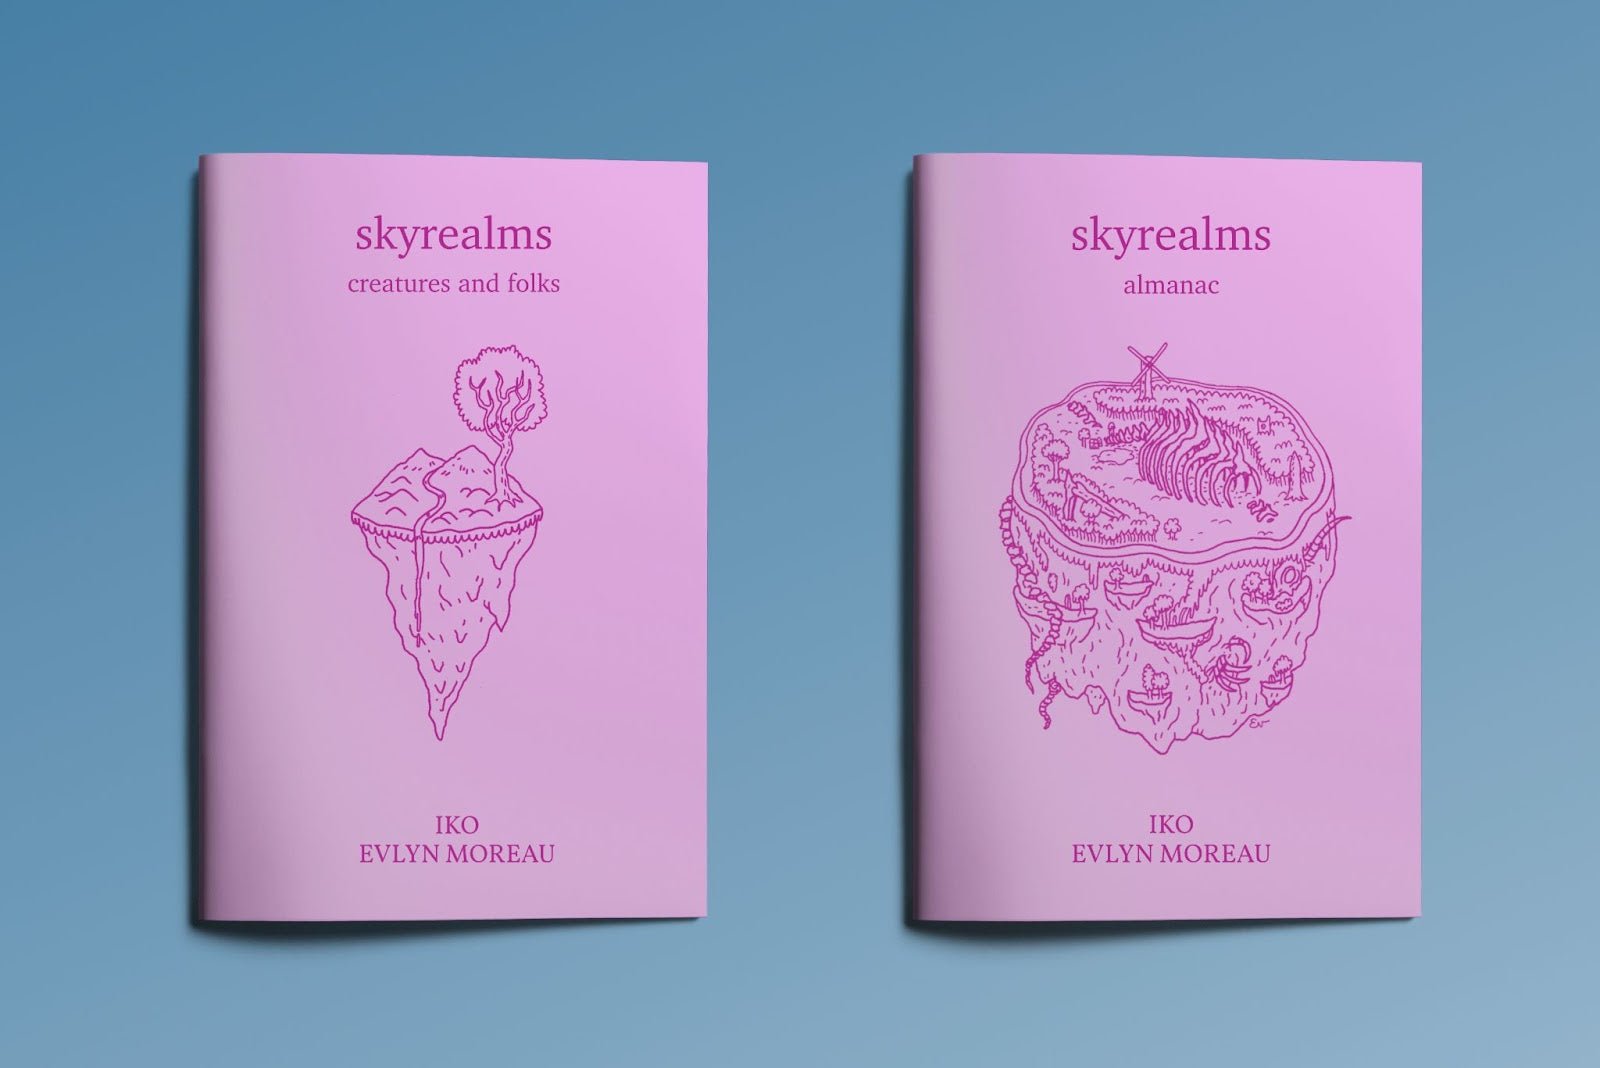 Skyrealms + PDF - Exalted Funeral